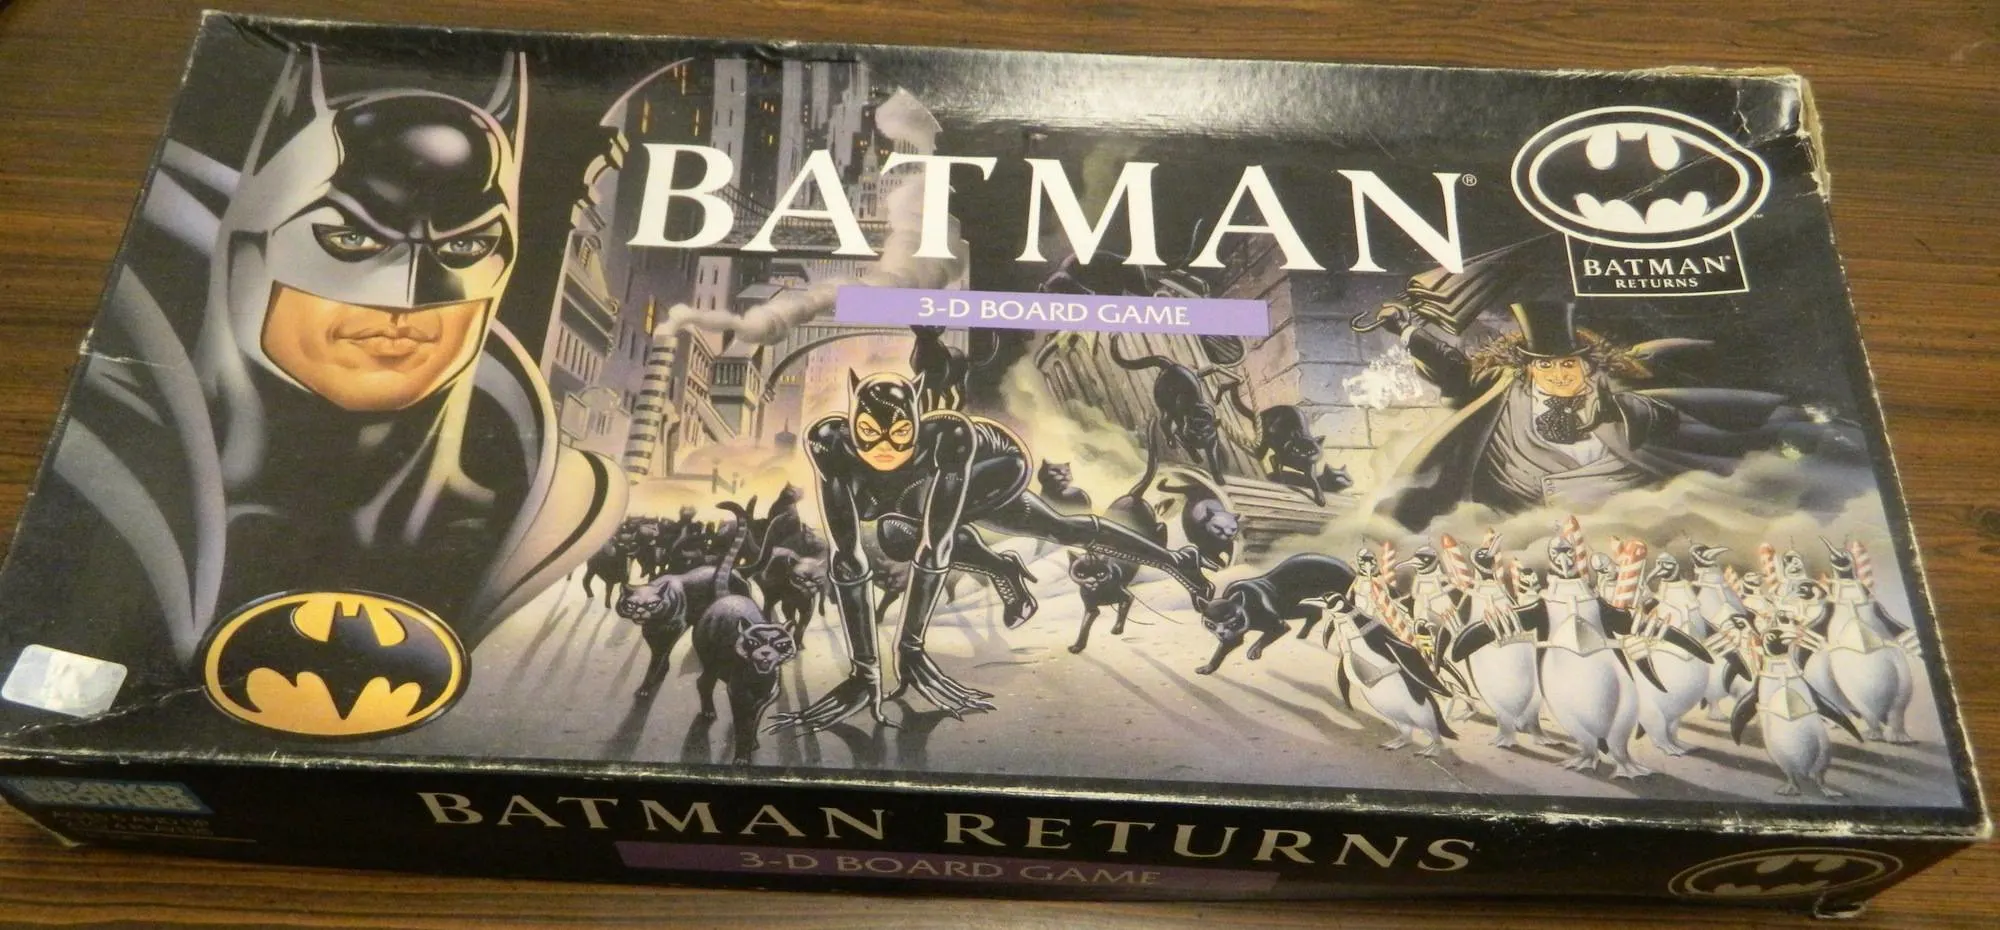 Batman Returns 3-D Board Game Review and Rules - Geeky Hobbies